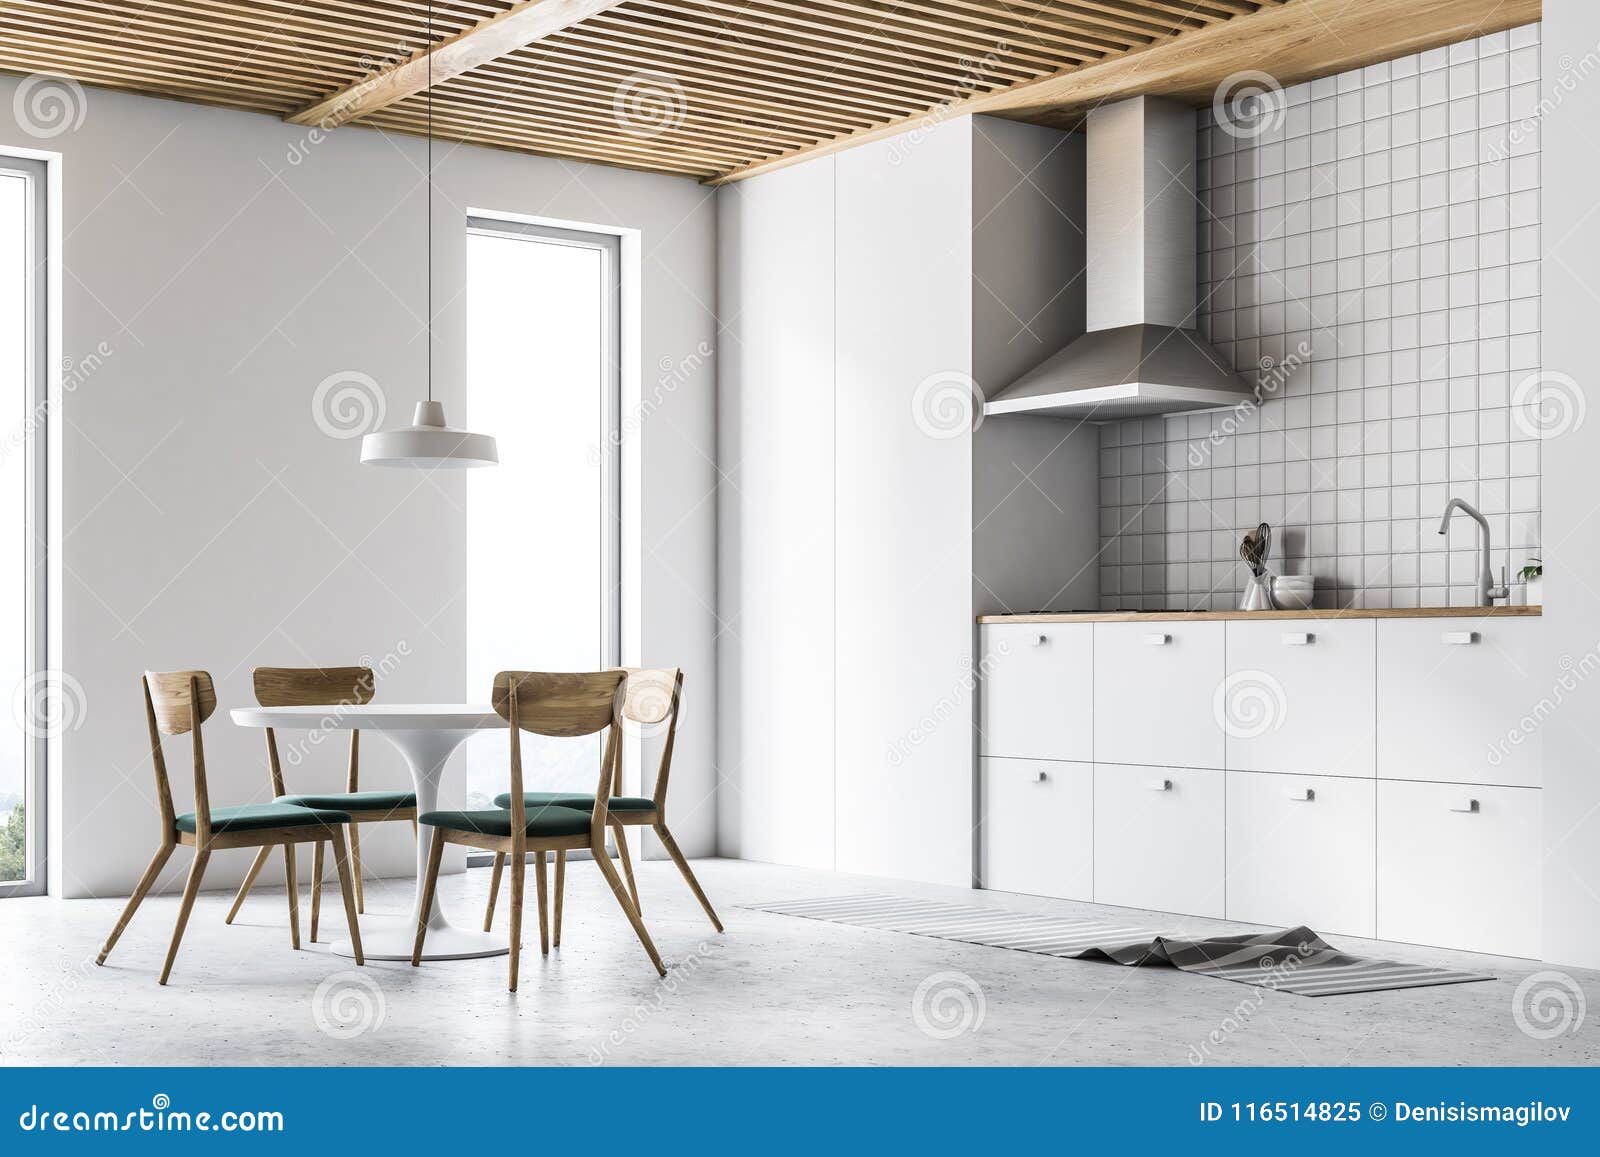 White Kitchen And Dining Room Interior Side View Stock